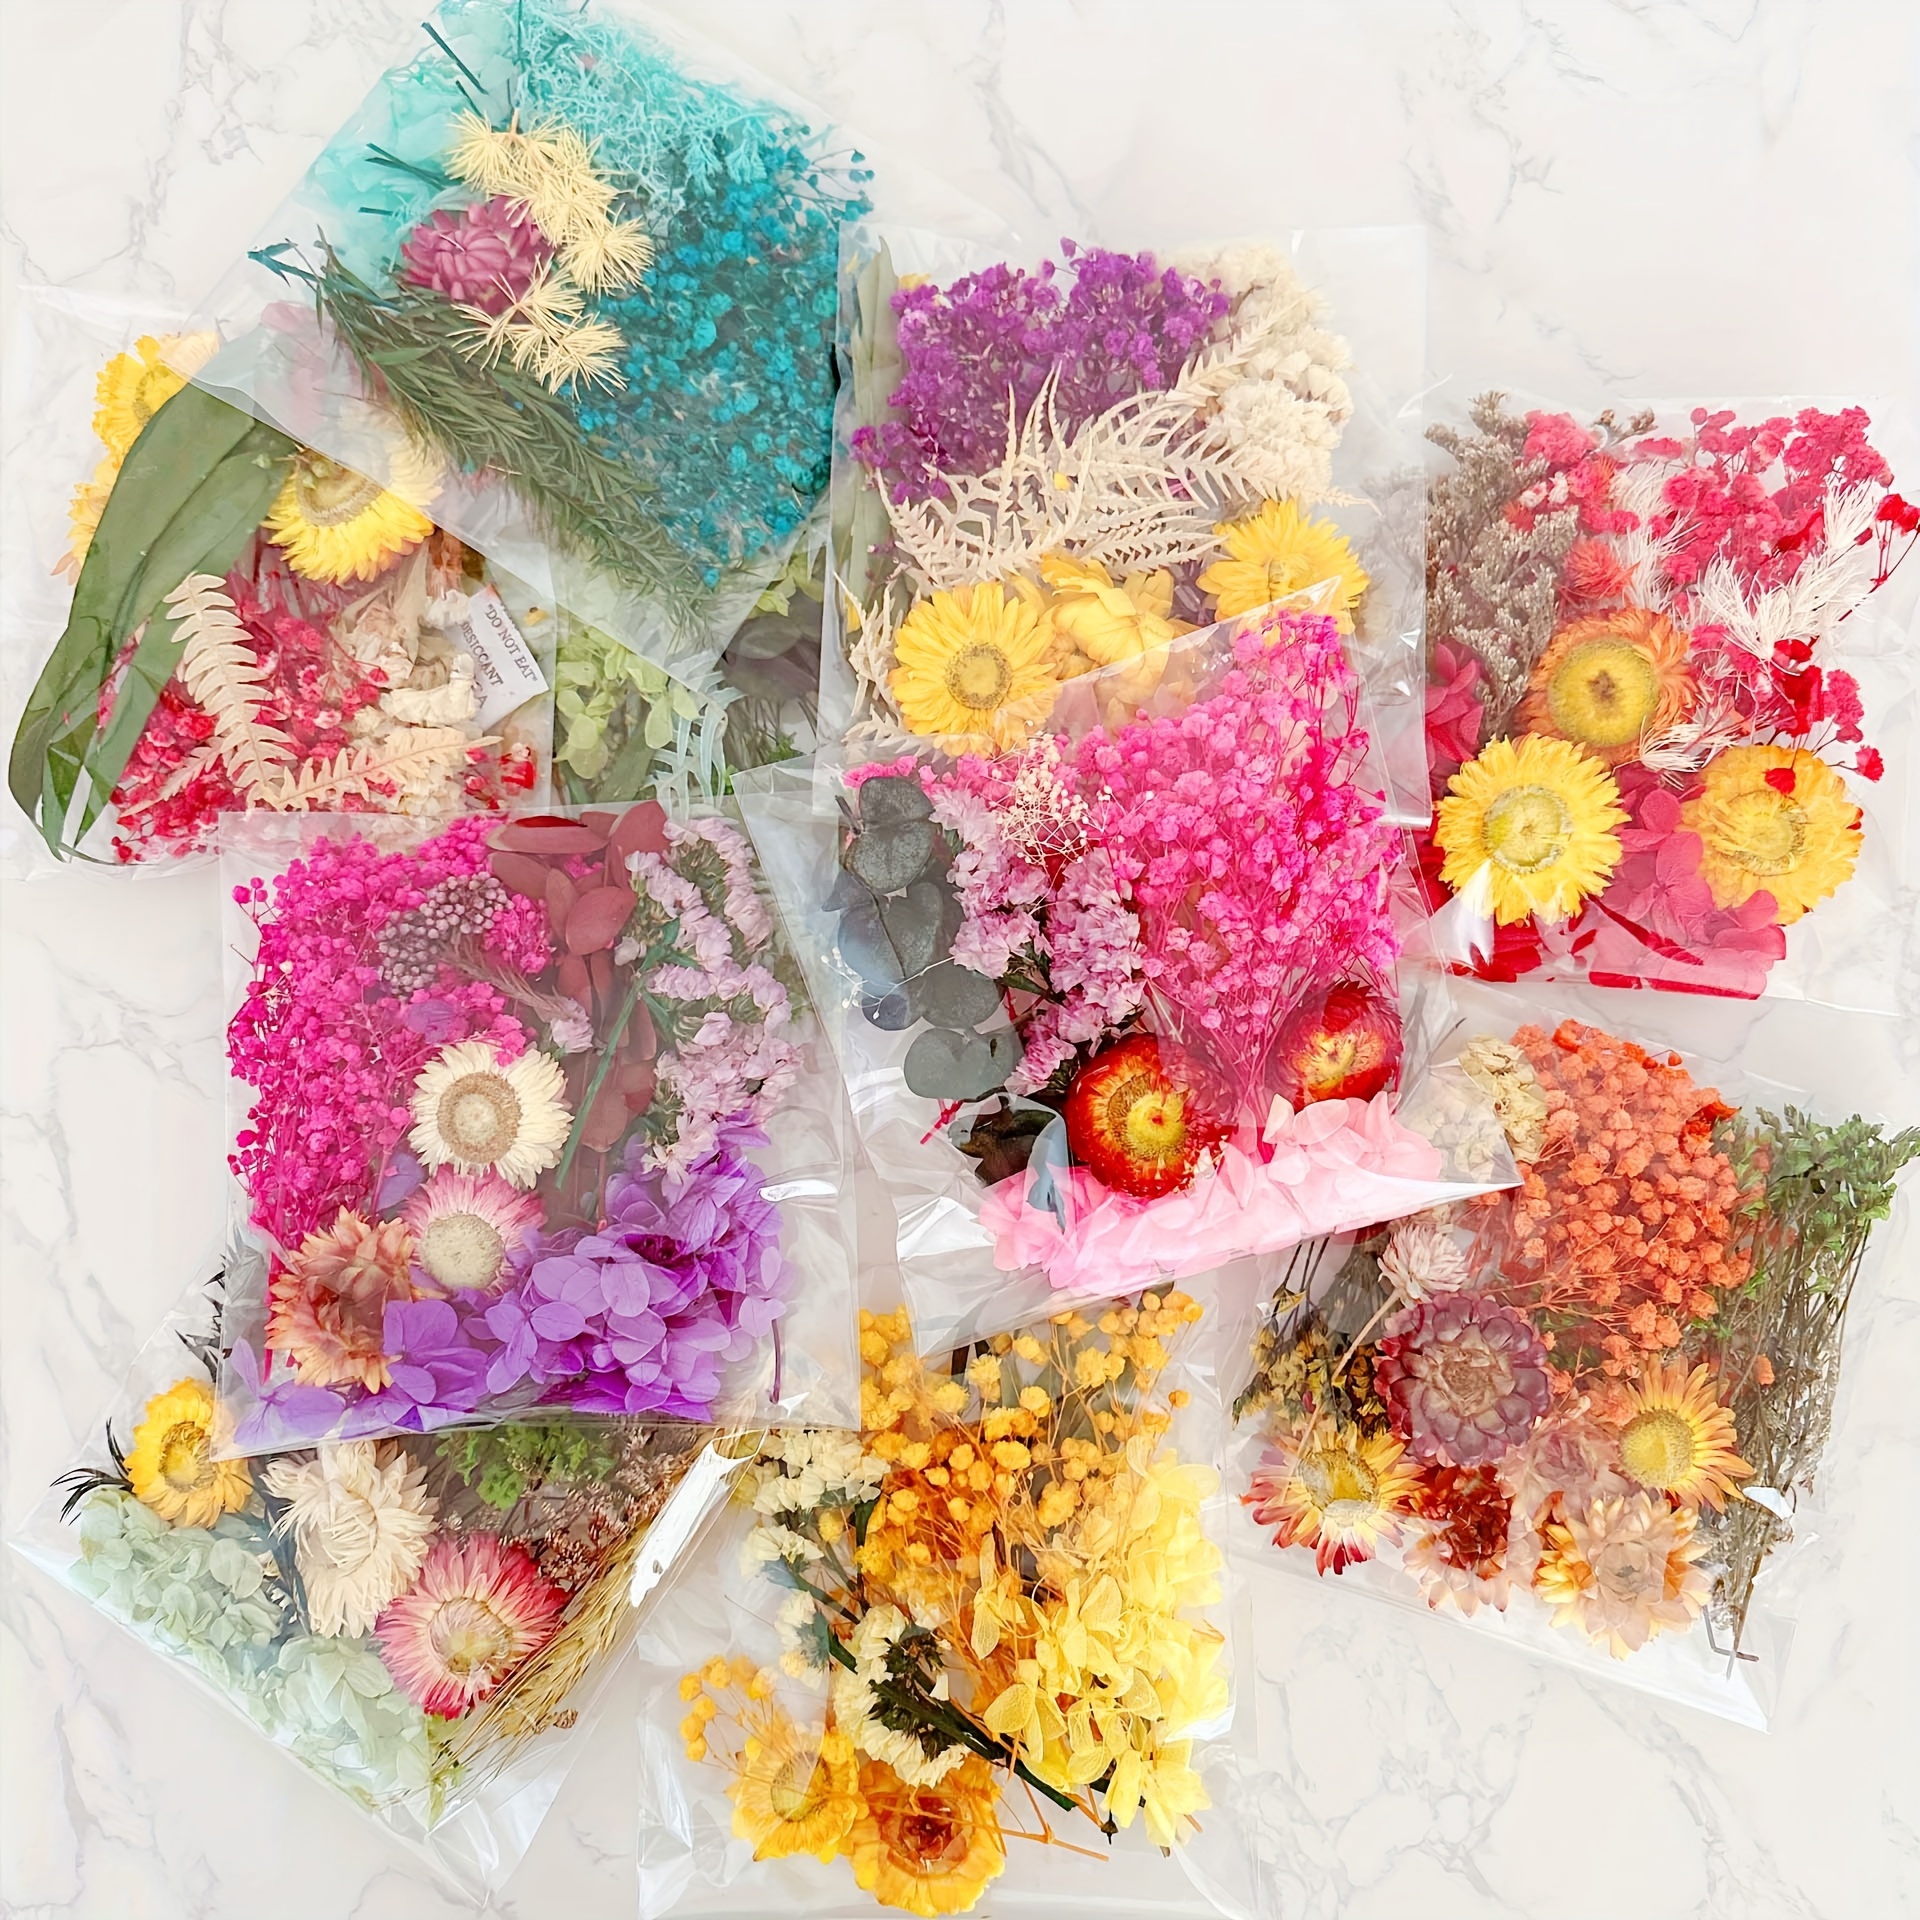 16 Bags Dried Flowers,100% Natural Dried Flowers Herbs Kit for Soap Making,  DIY Candle Making,Bath - Include Rose Petals,Lavender,Don't Forget